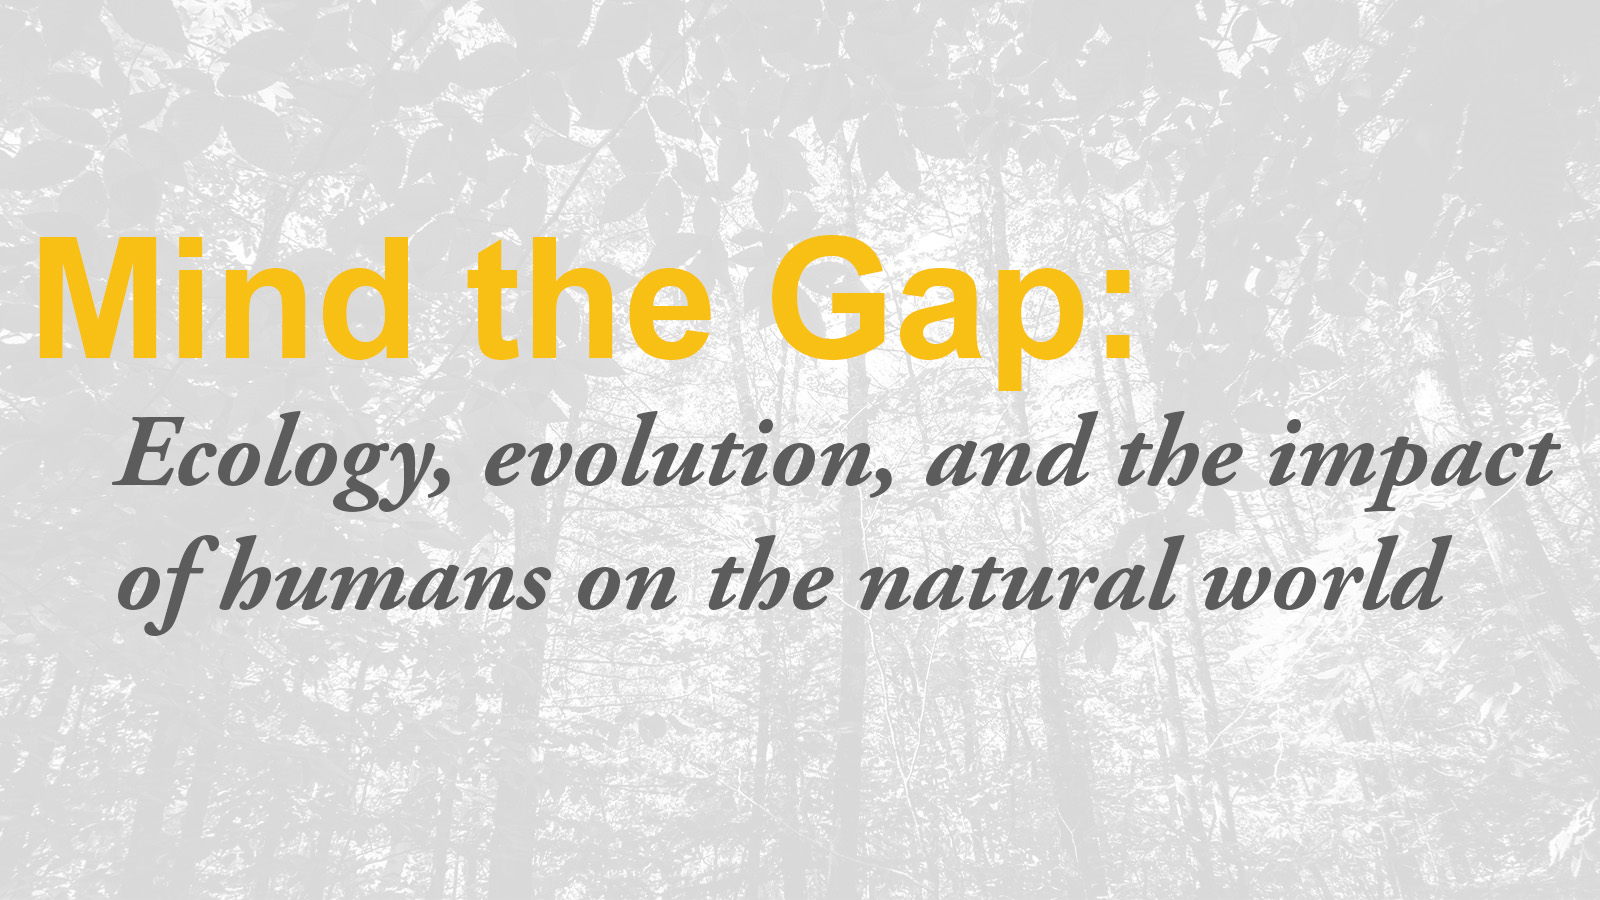 text over trees reads "Mind the Gap: Ecology, evolution, and the impact of humans on the natural world